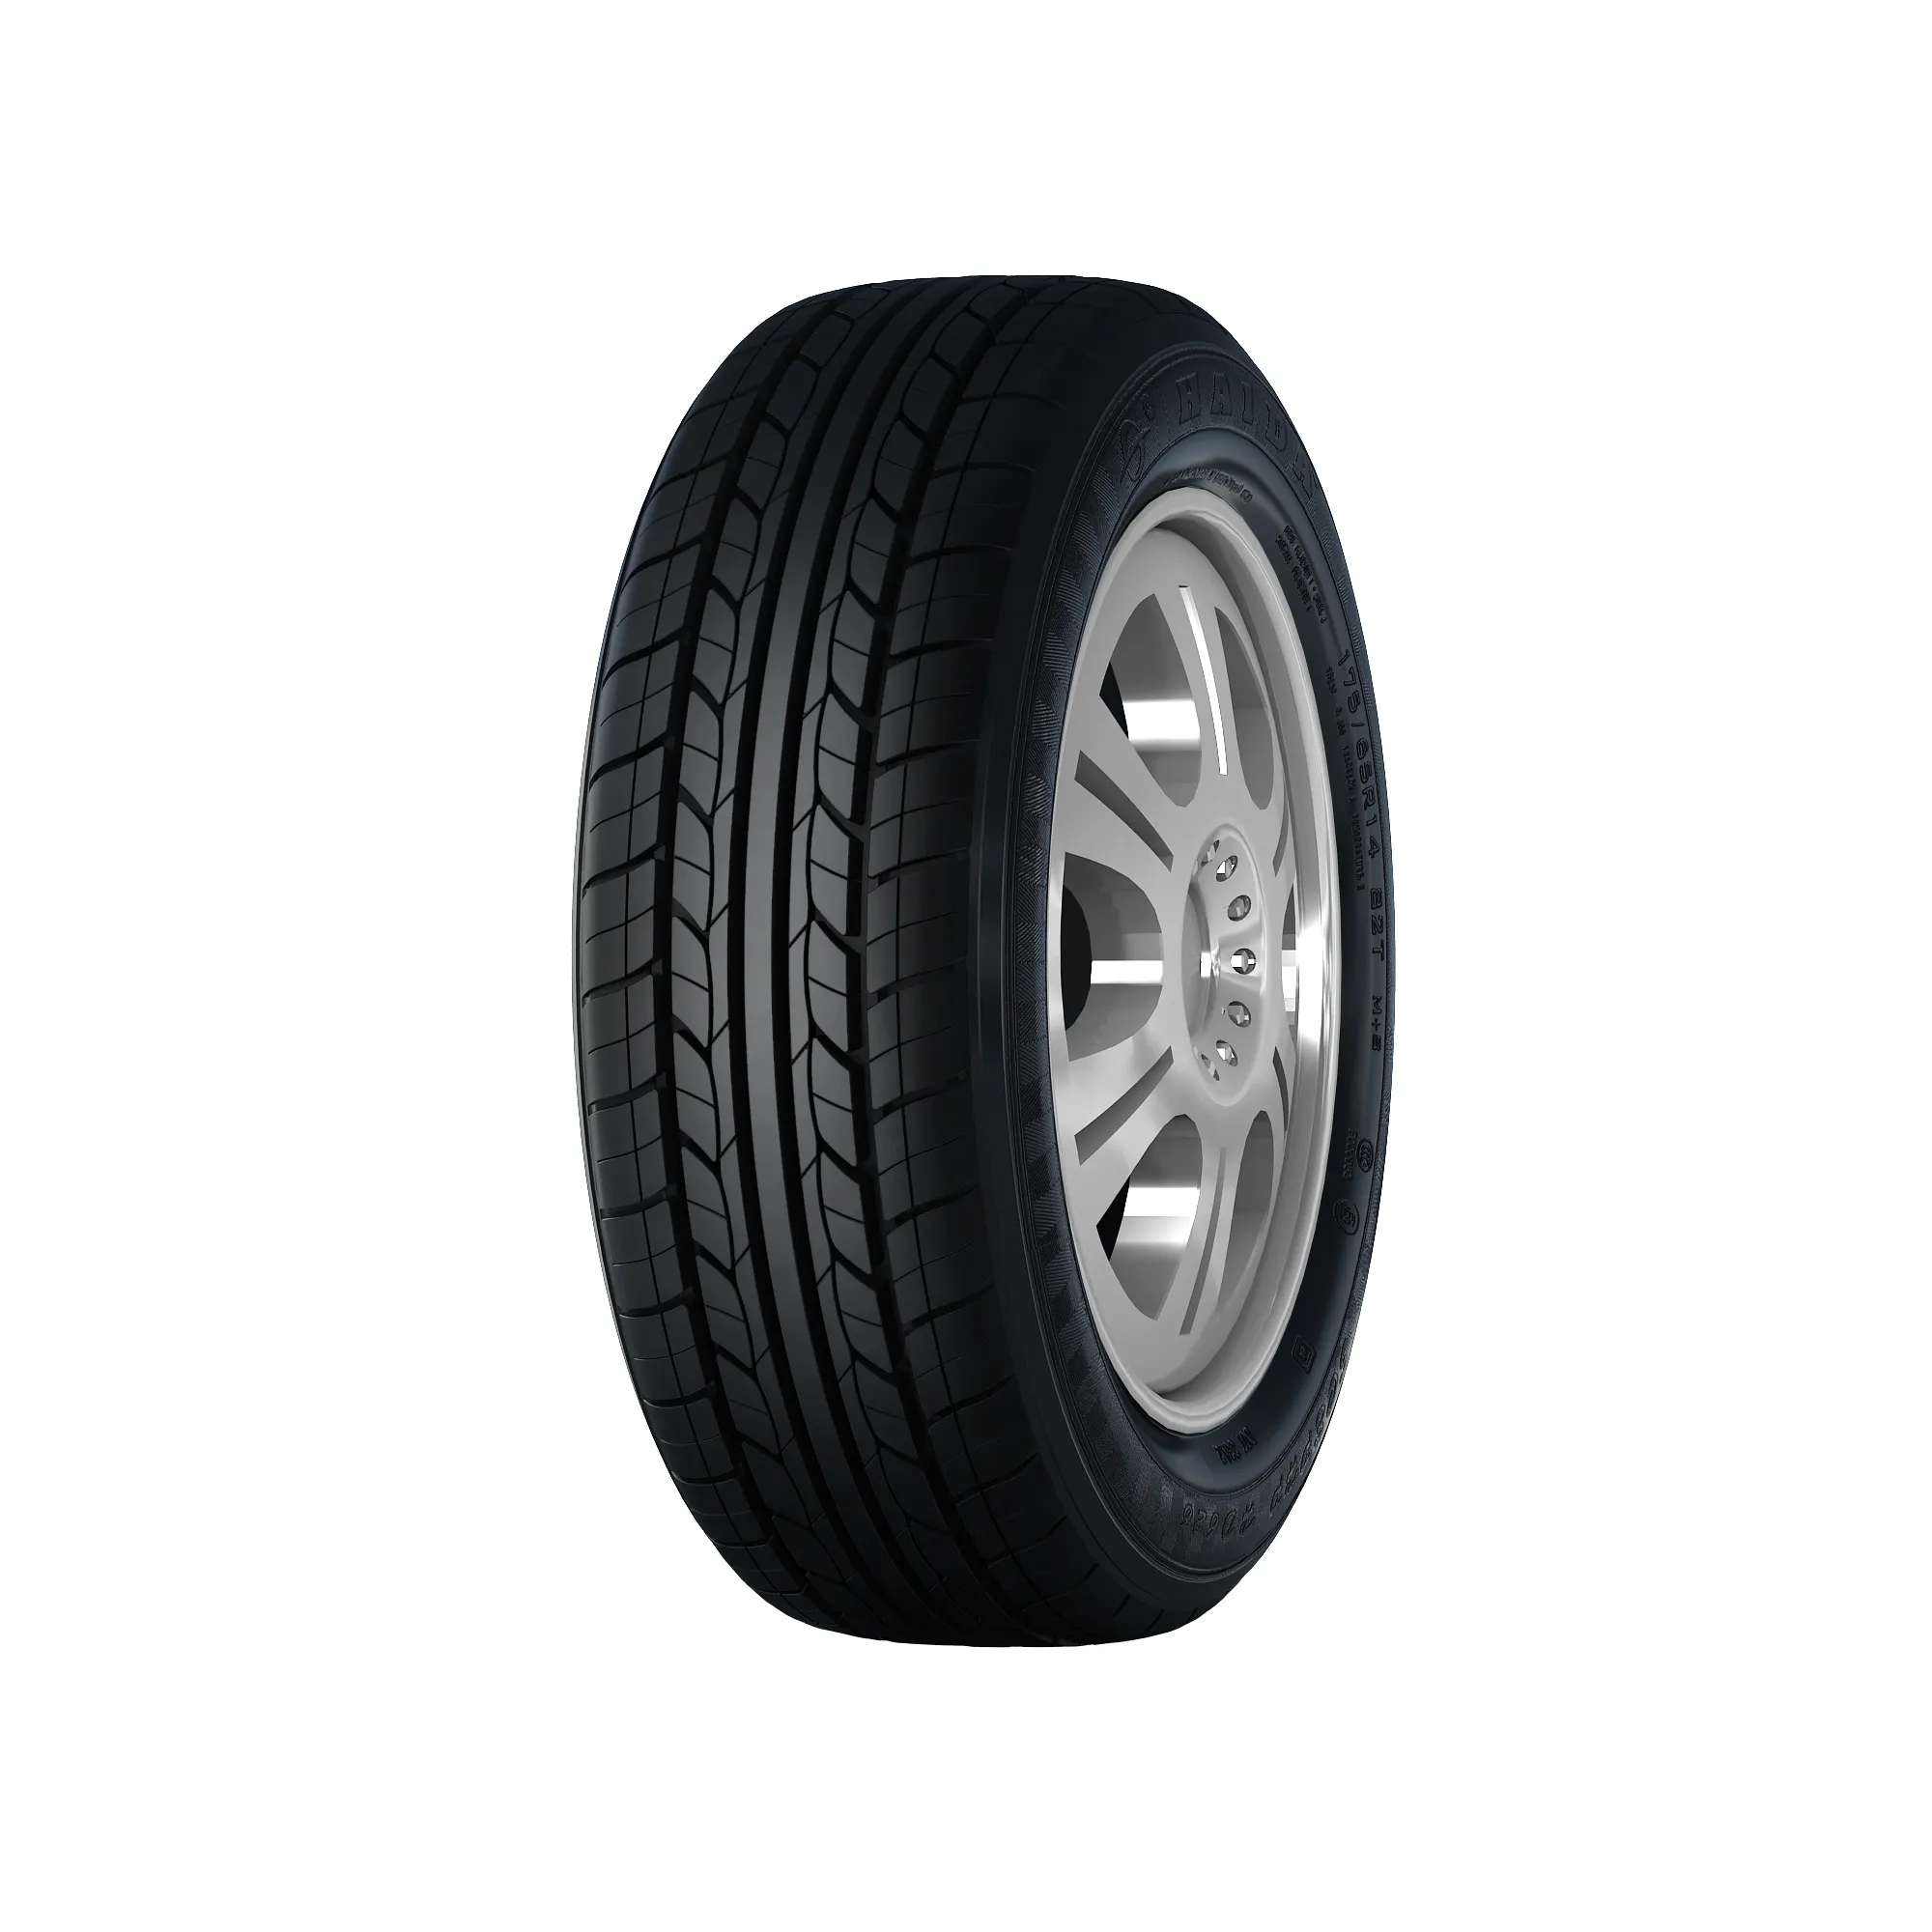 New Car Tyres for Vehicles Top 10 Chinese tyre brands looking for distributor SUV tyre 225/45/17 235/40/18 245/50/17 255/35/18